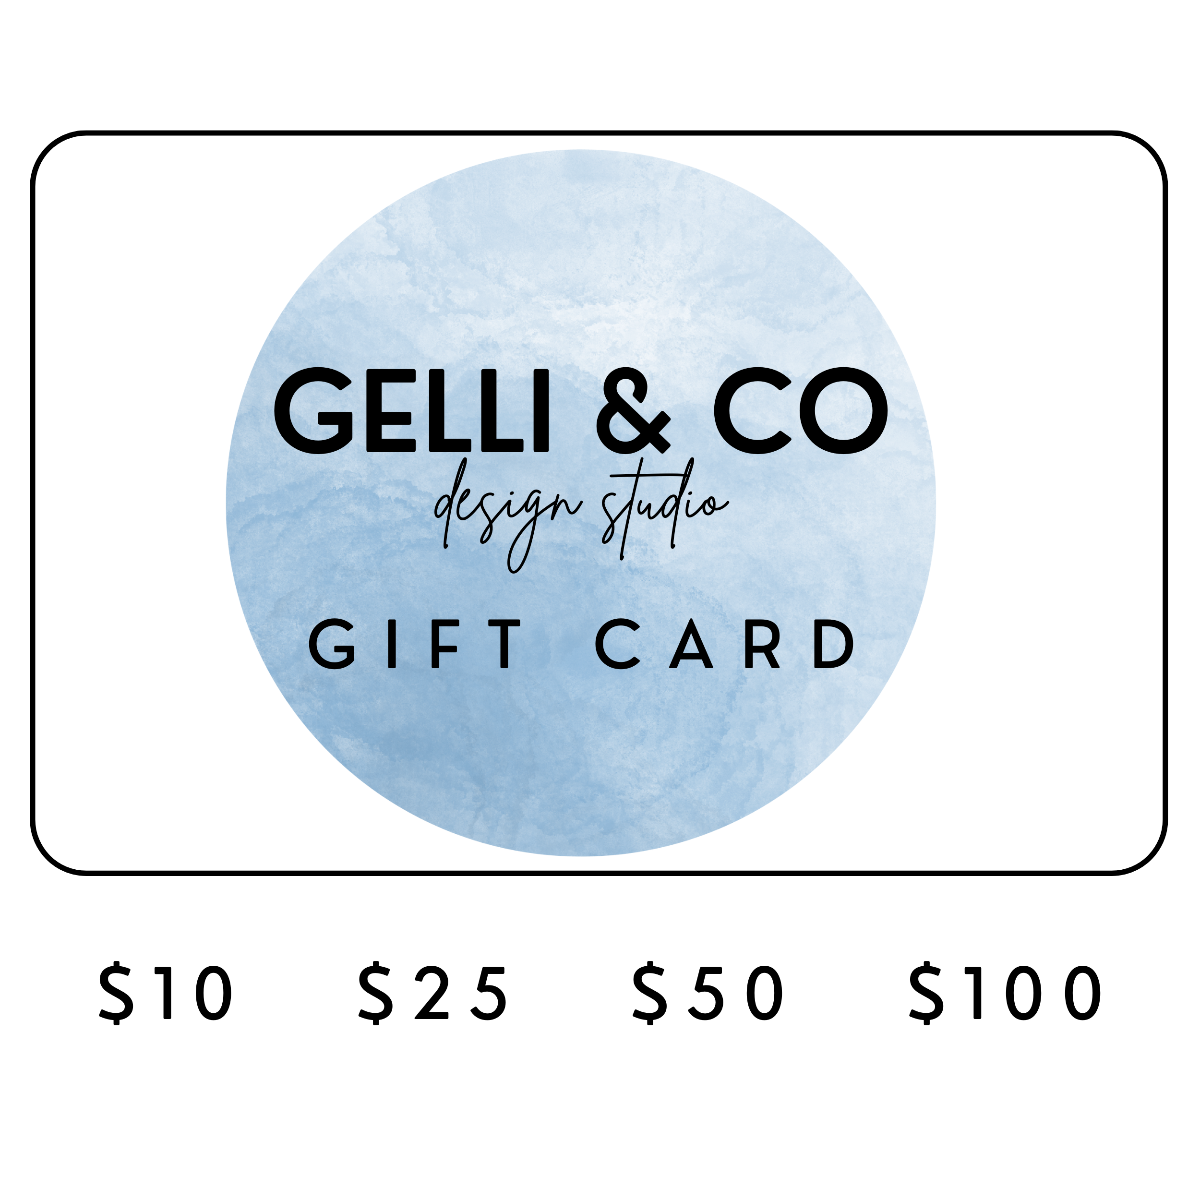 Giftcard Promo for Gelli & Co